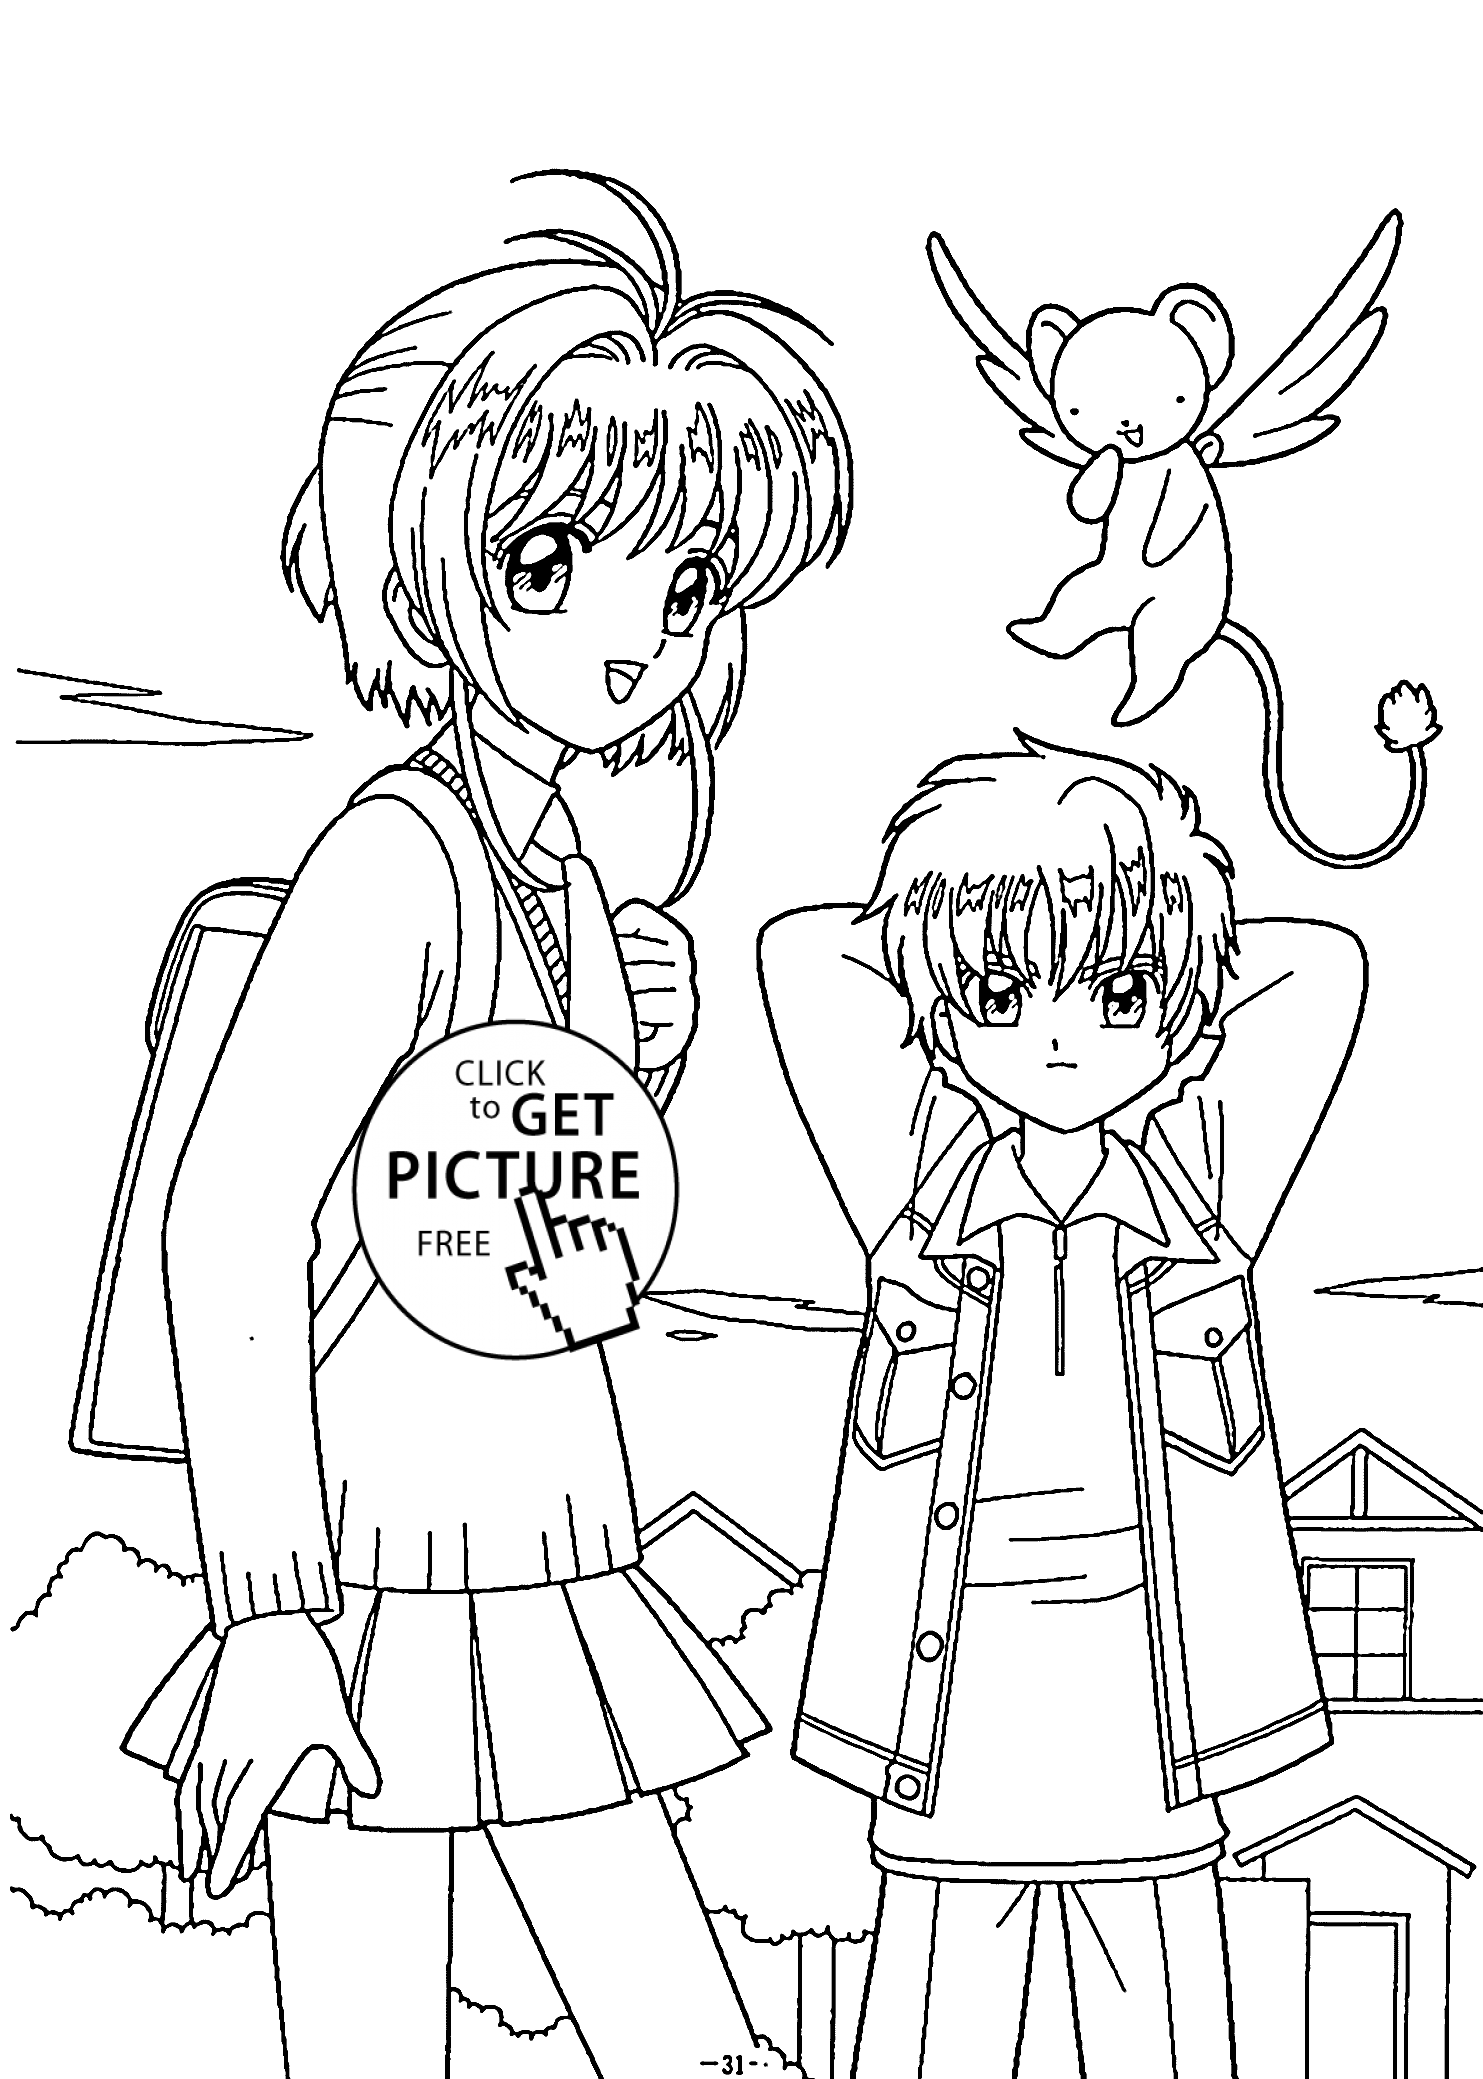 free anime coloring pages coloring pages anime coloring pages free and printable pages anime coloring free 